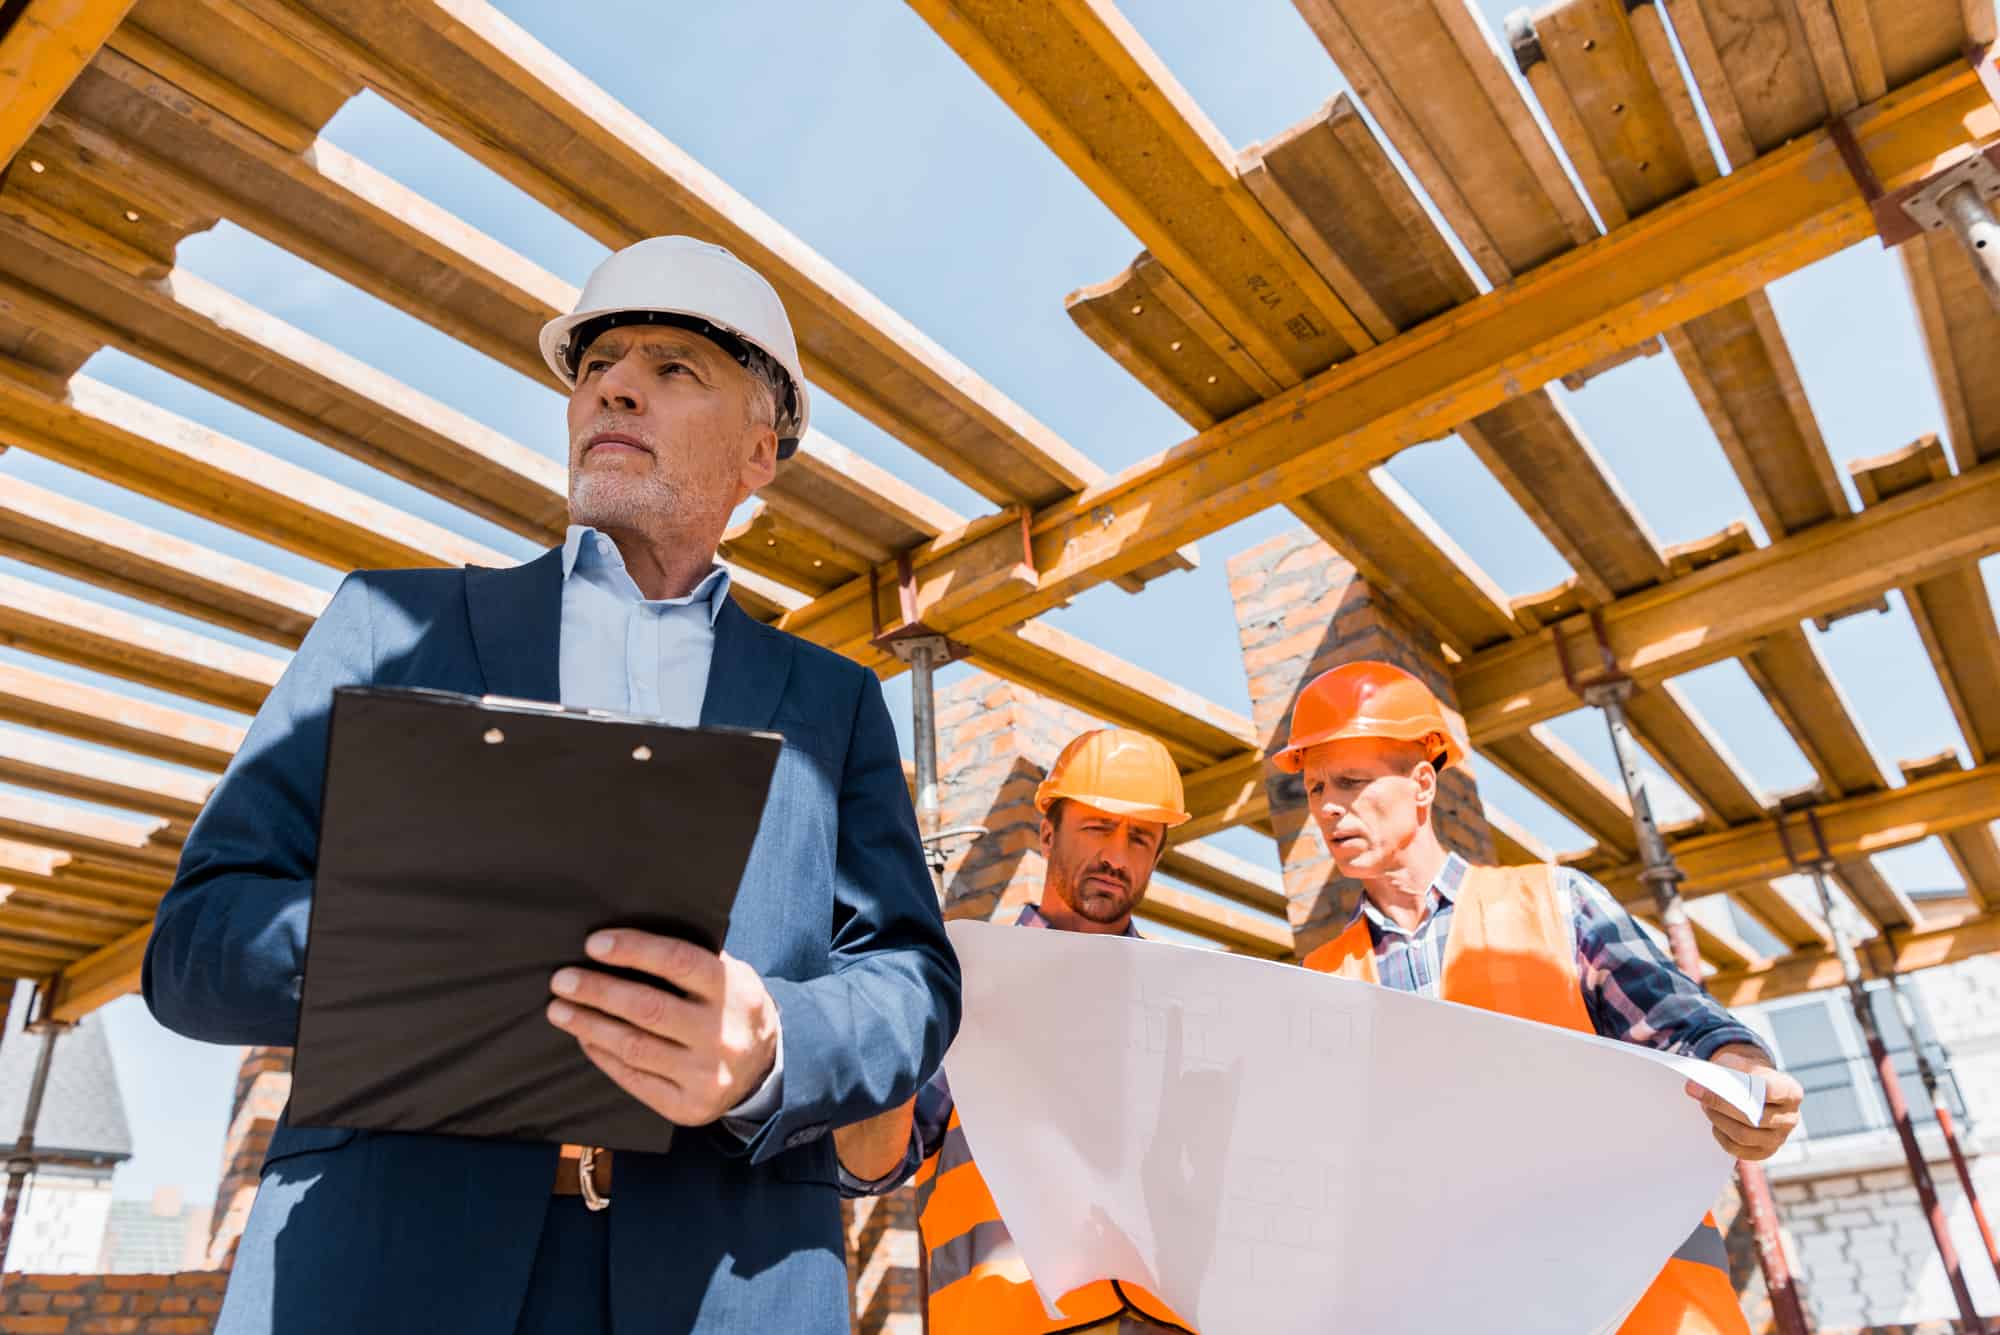 Three construction workers, wearing hard hats and addressing the skilled labor shortage at a construction site, with one man in the foreground holding a clipboard.